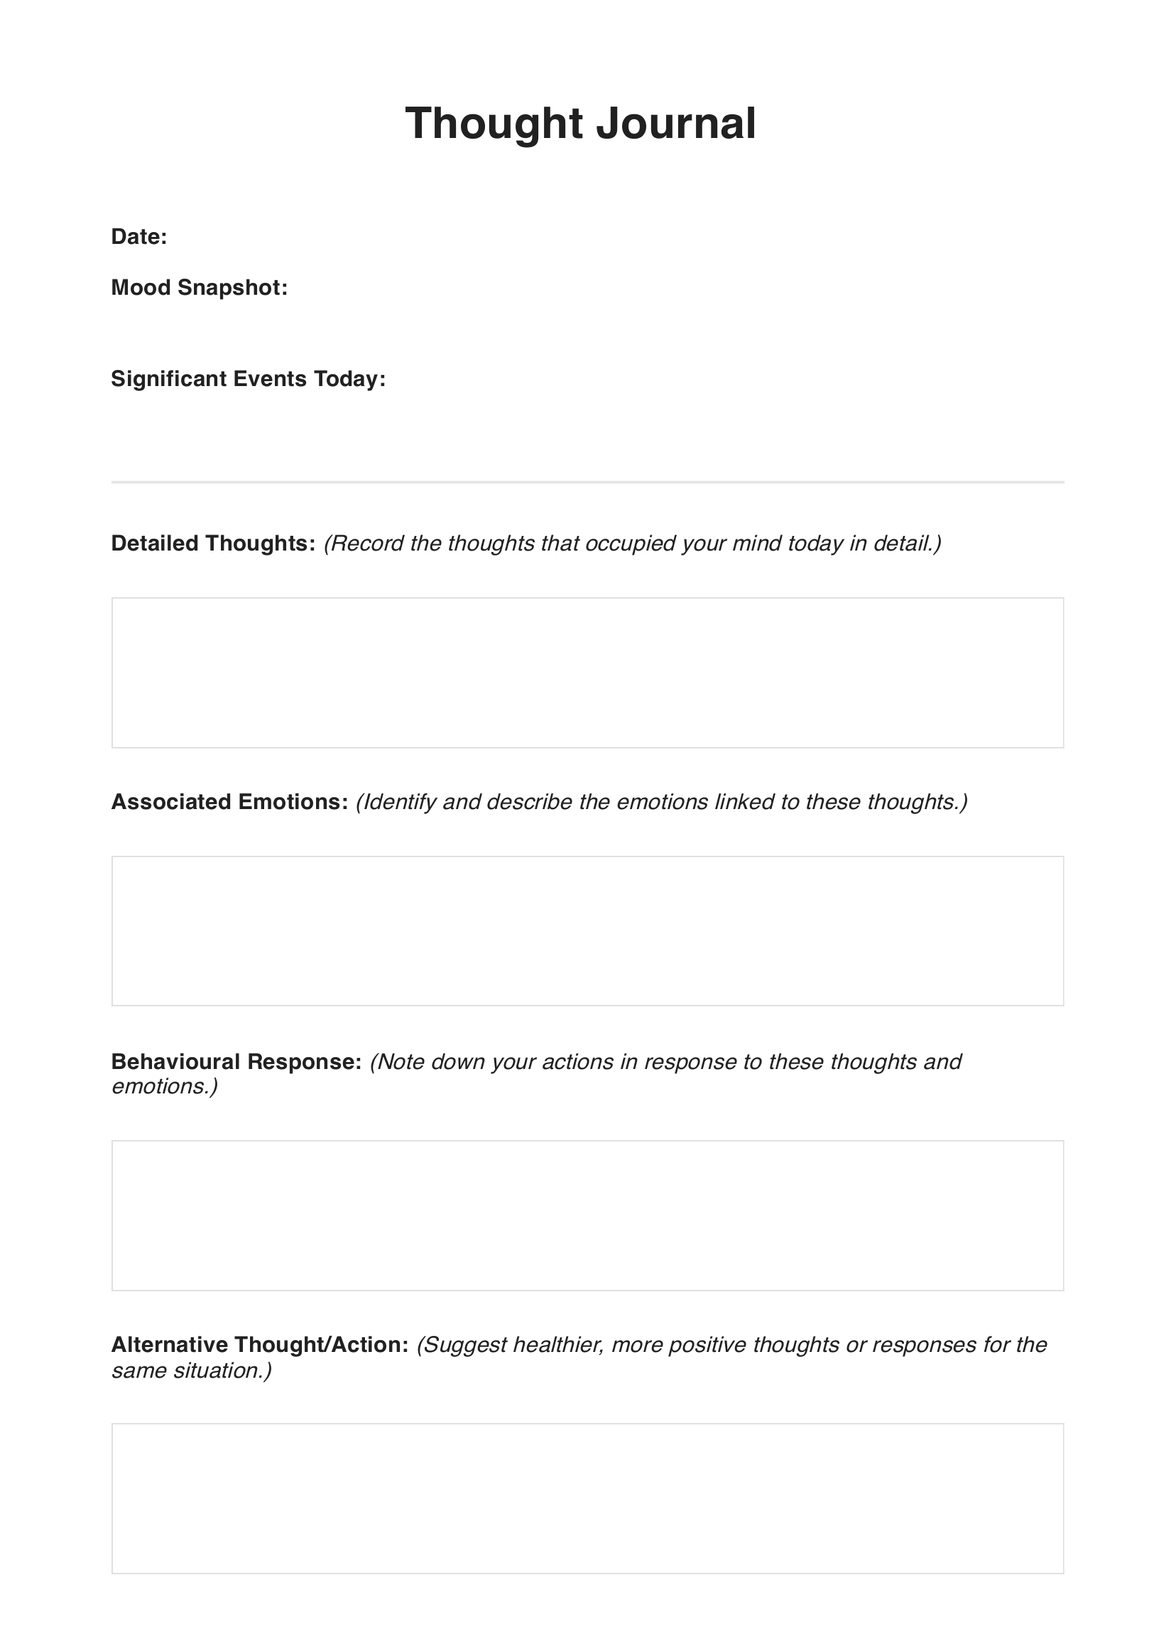 Thought Journal PDF Example